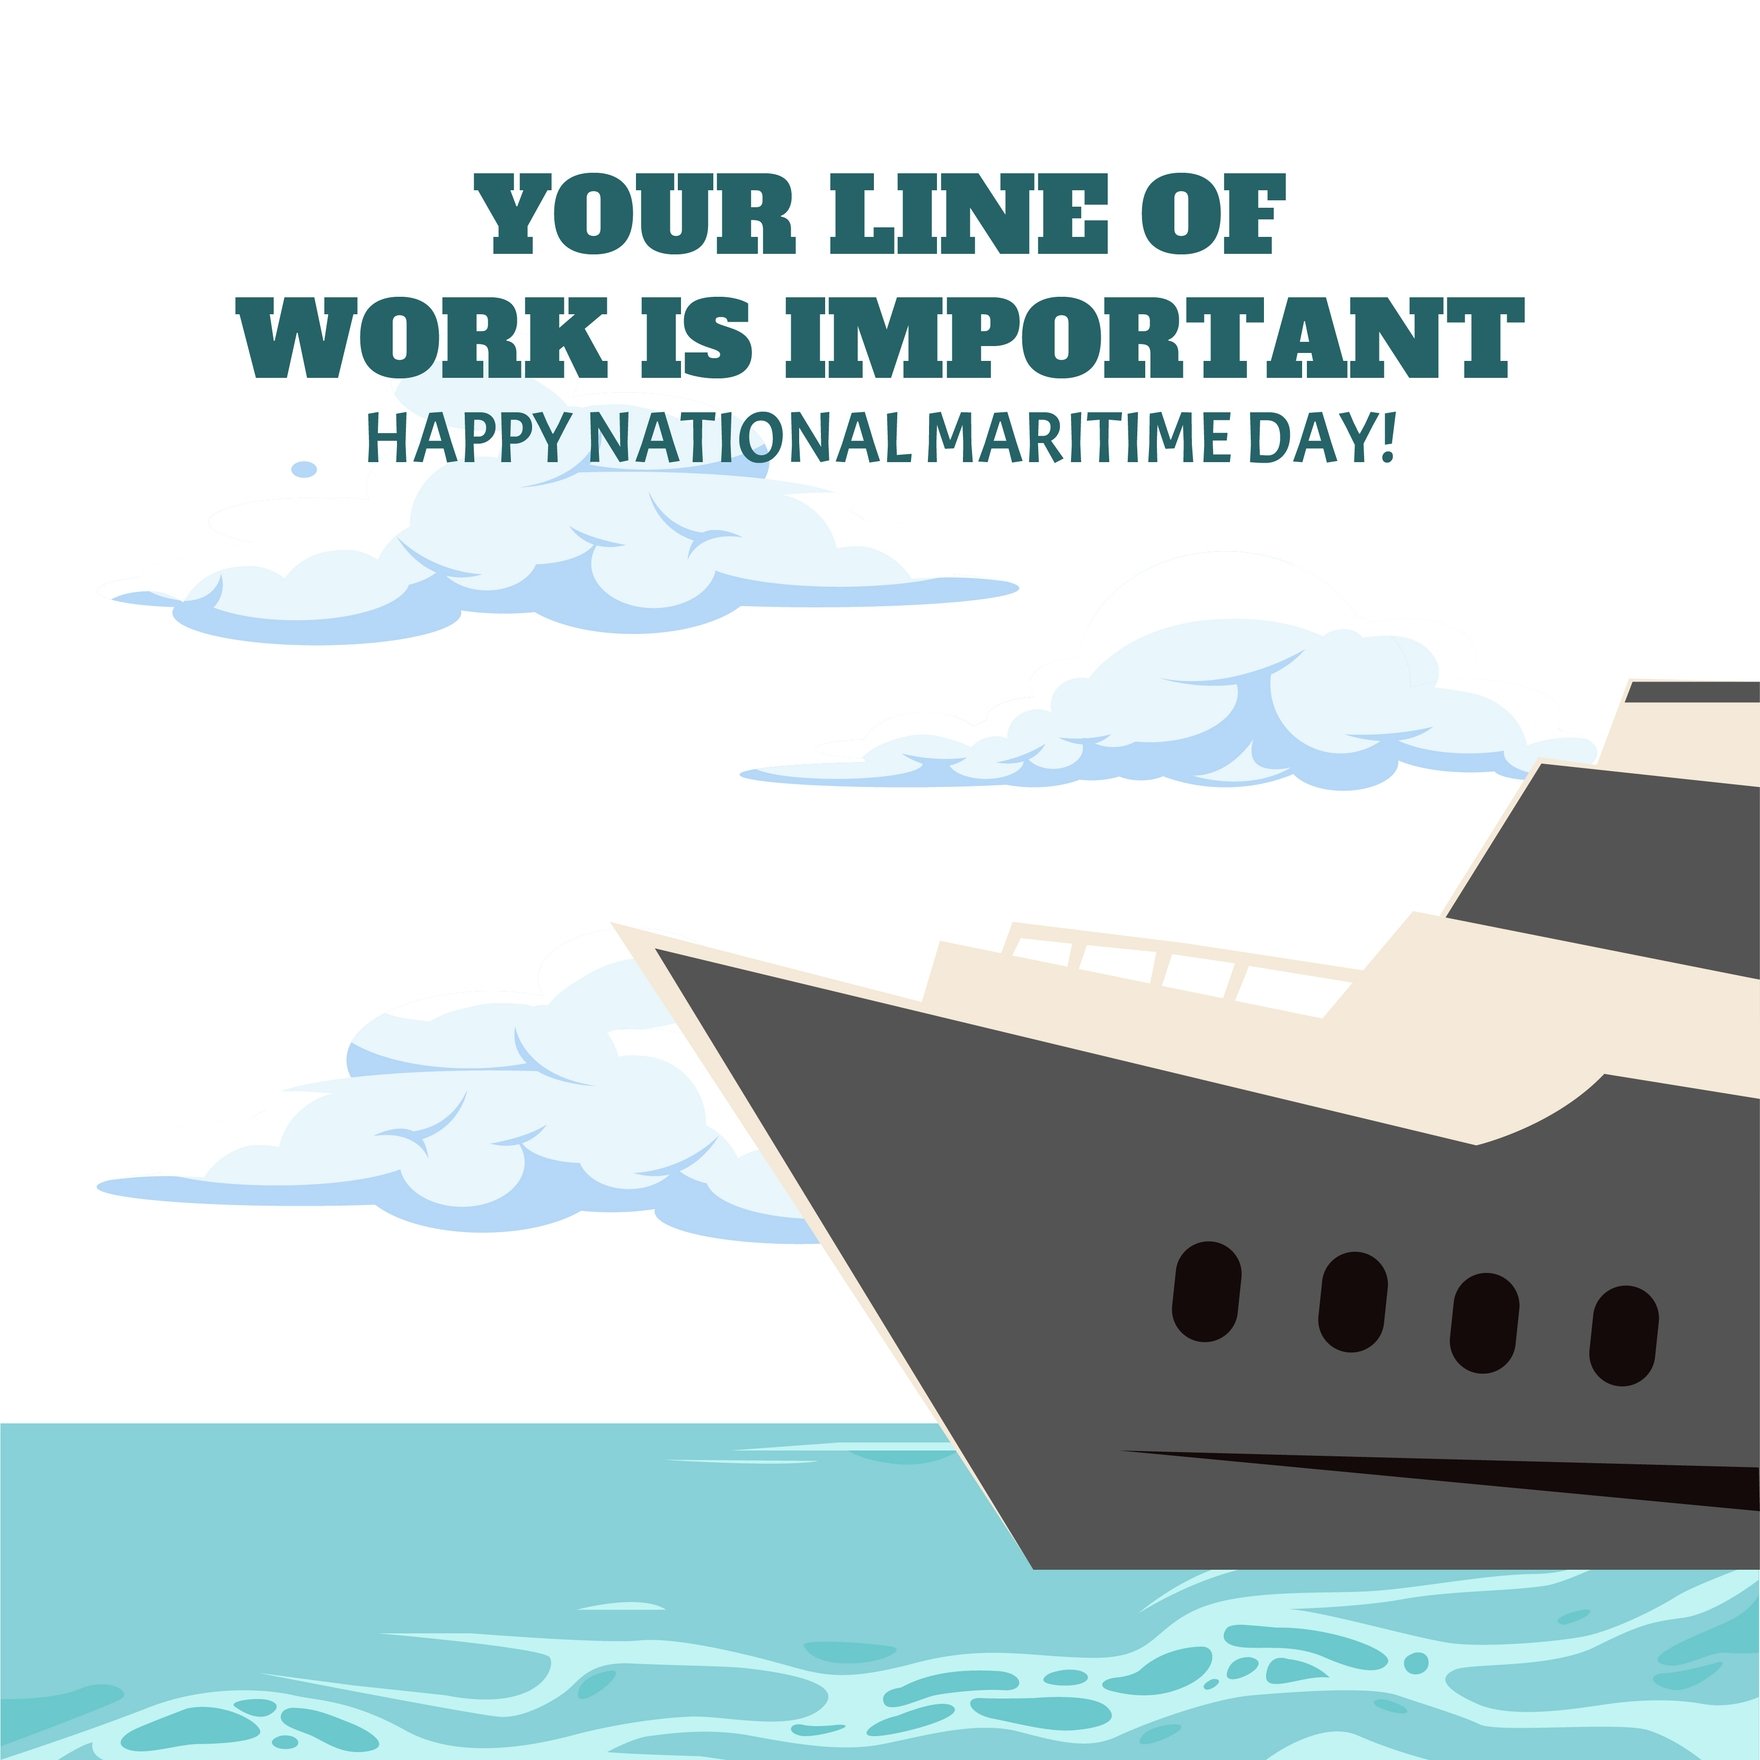 Free National Maritime Day Greeting Card Vector in Illustrator, PSD, EPS, SVG, JPG, PNG